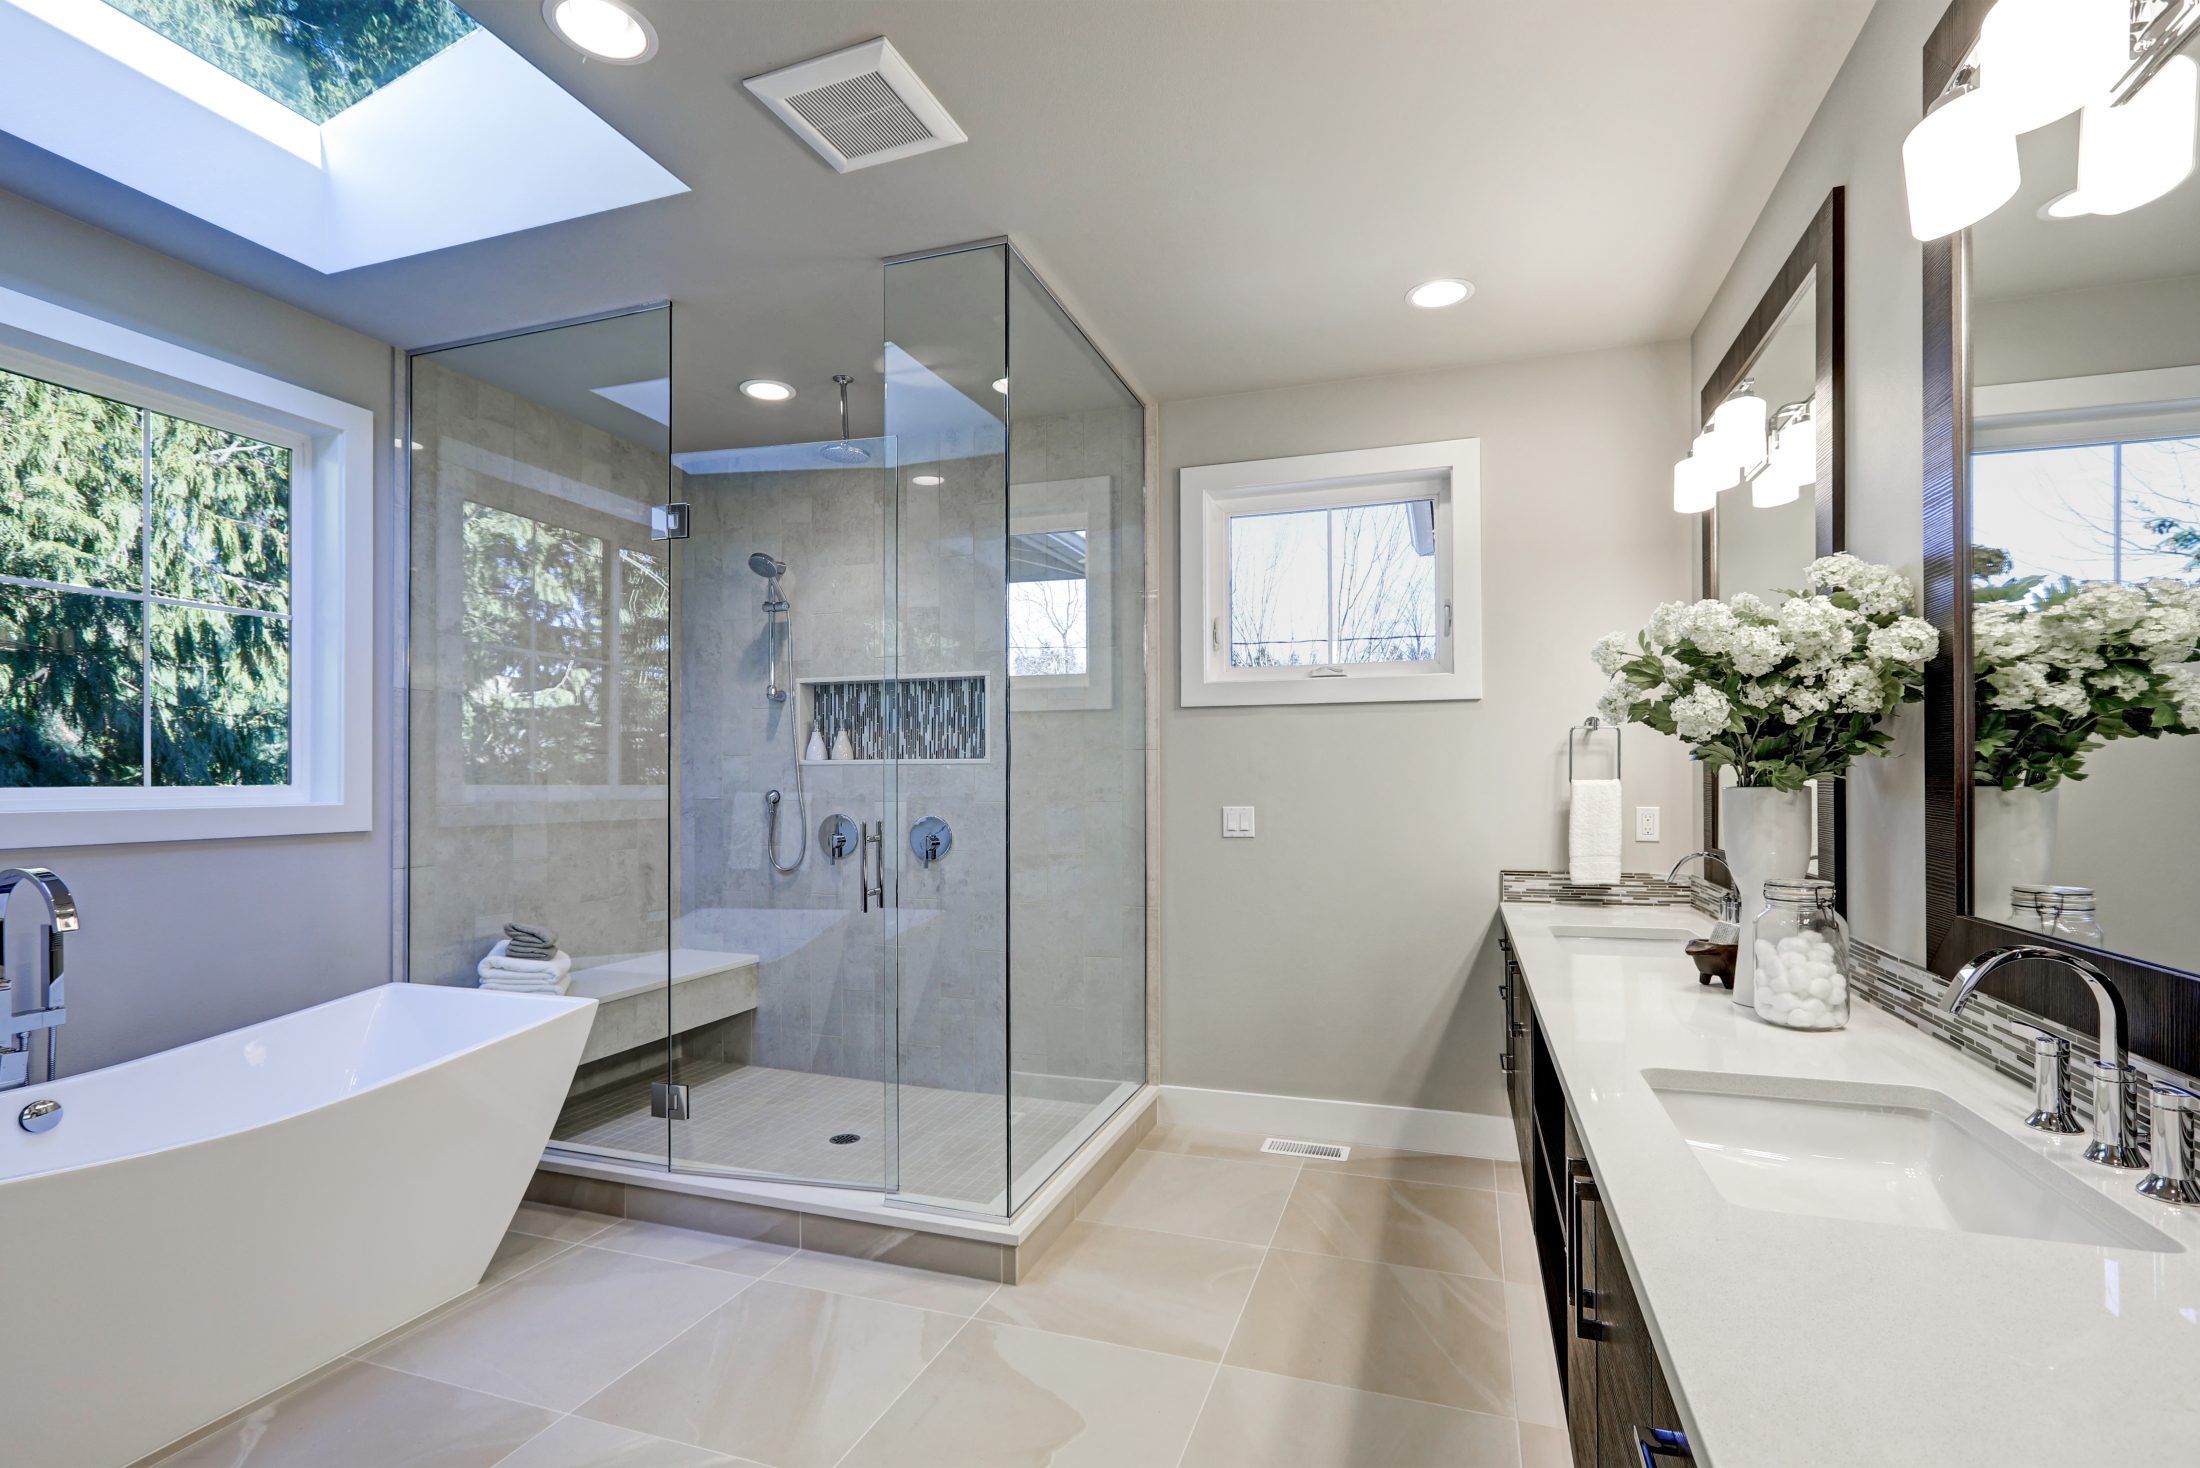 Refresh Your Bathroom with Eye-Catching Design in Vancouver